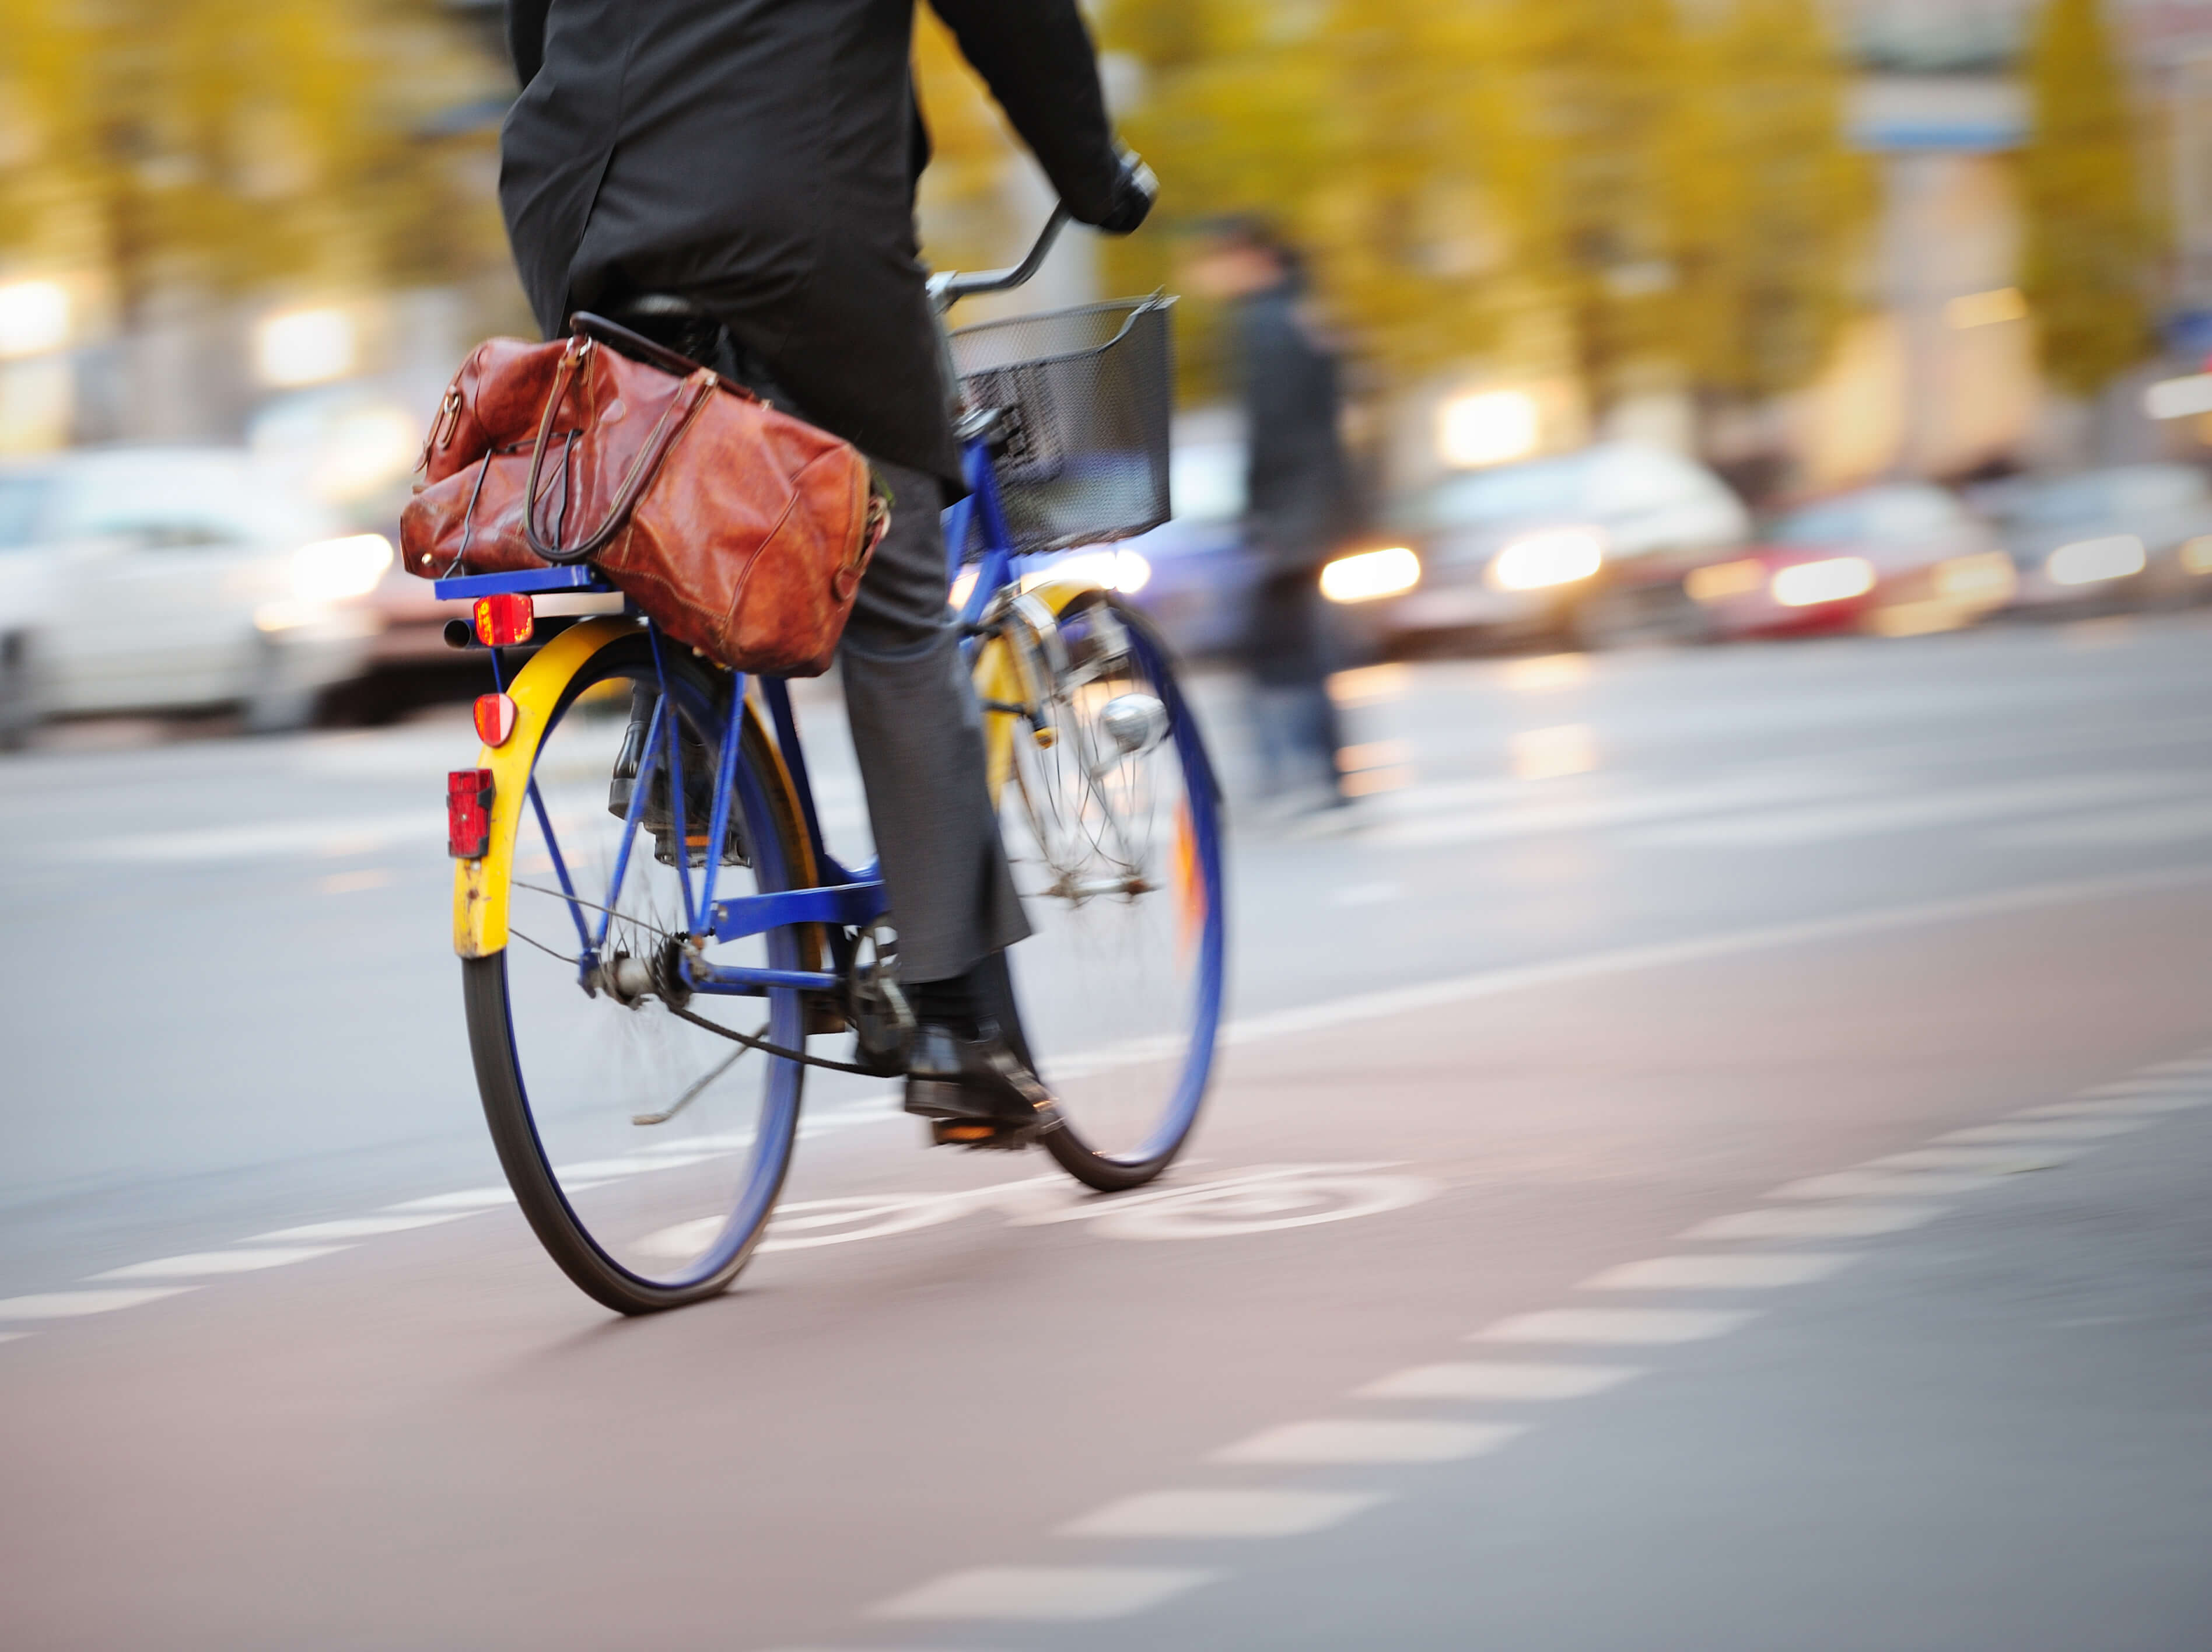 A man rides a blue and yellow bicycle along a busy road